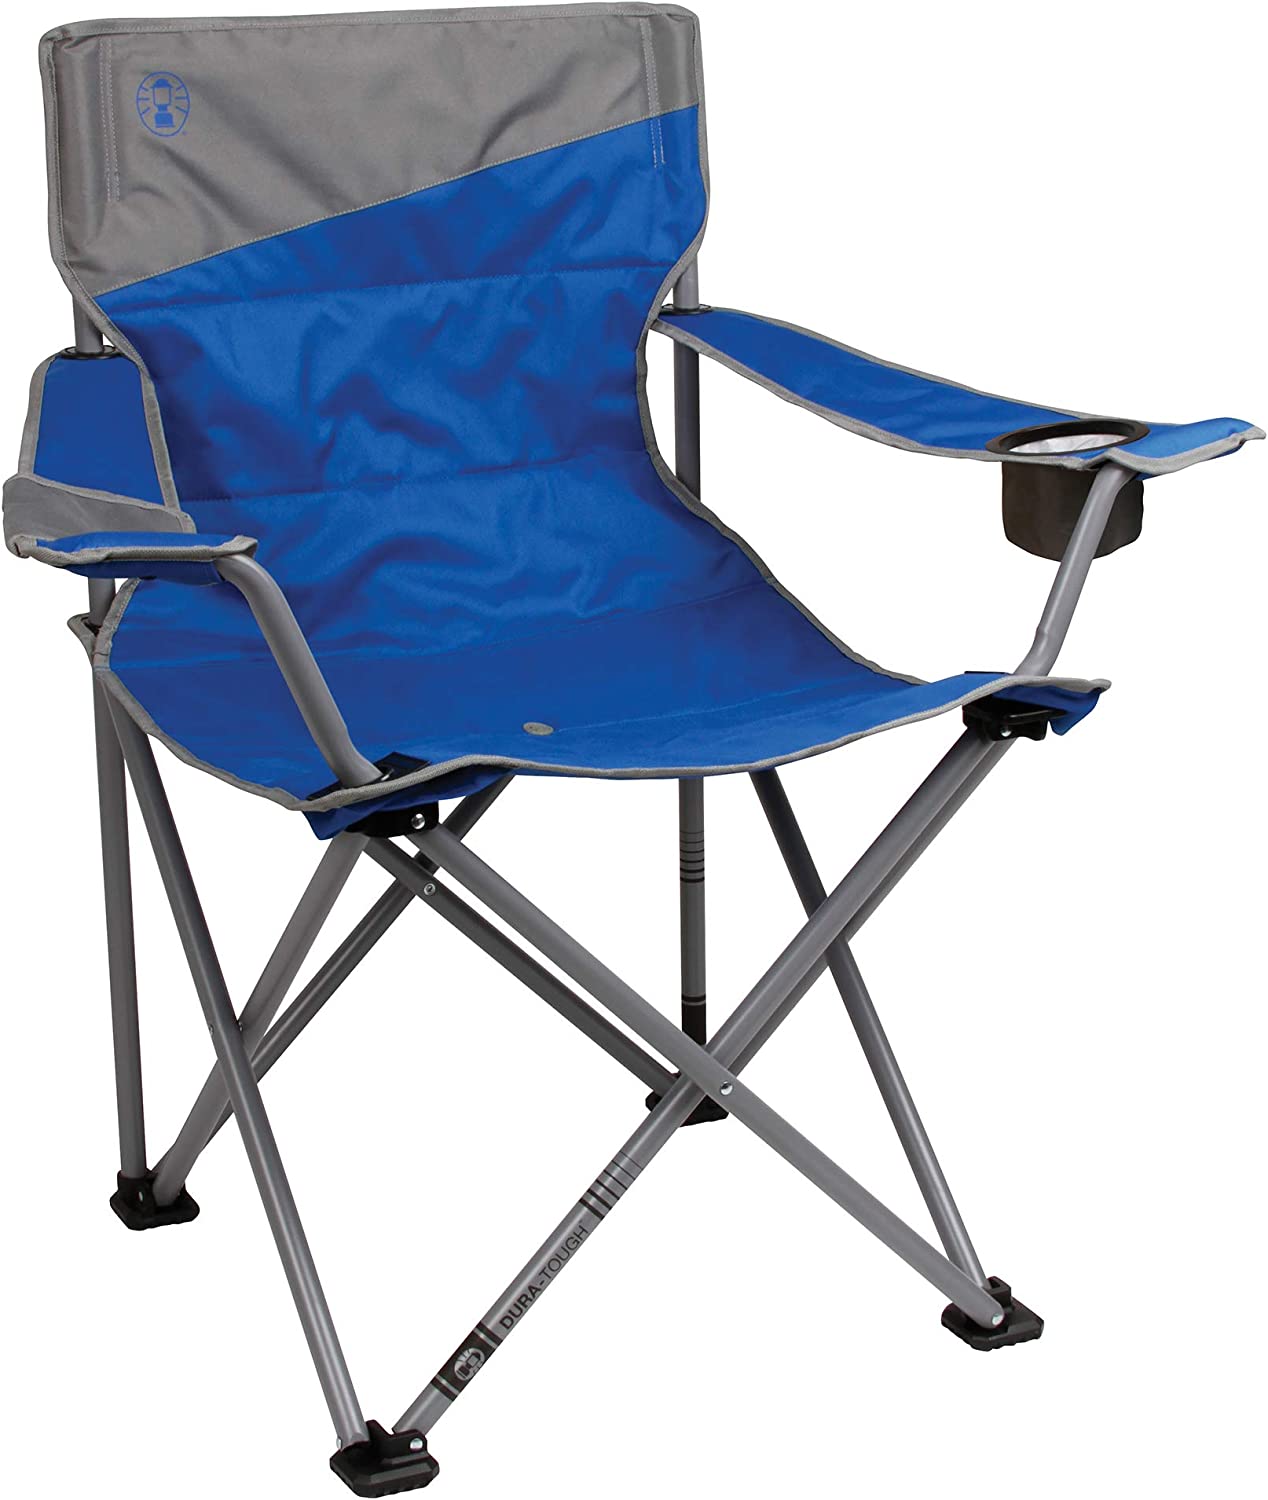 BOGO 50% Off Coleman Big-N-Tall Quad Camping Chair (holds up to 600lbs) $57.73 + Free Shipping